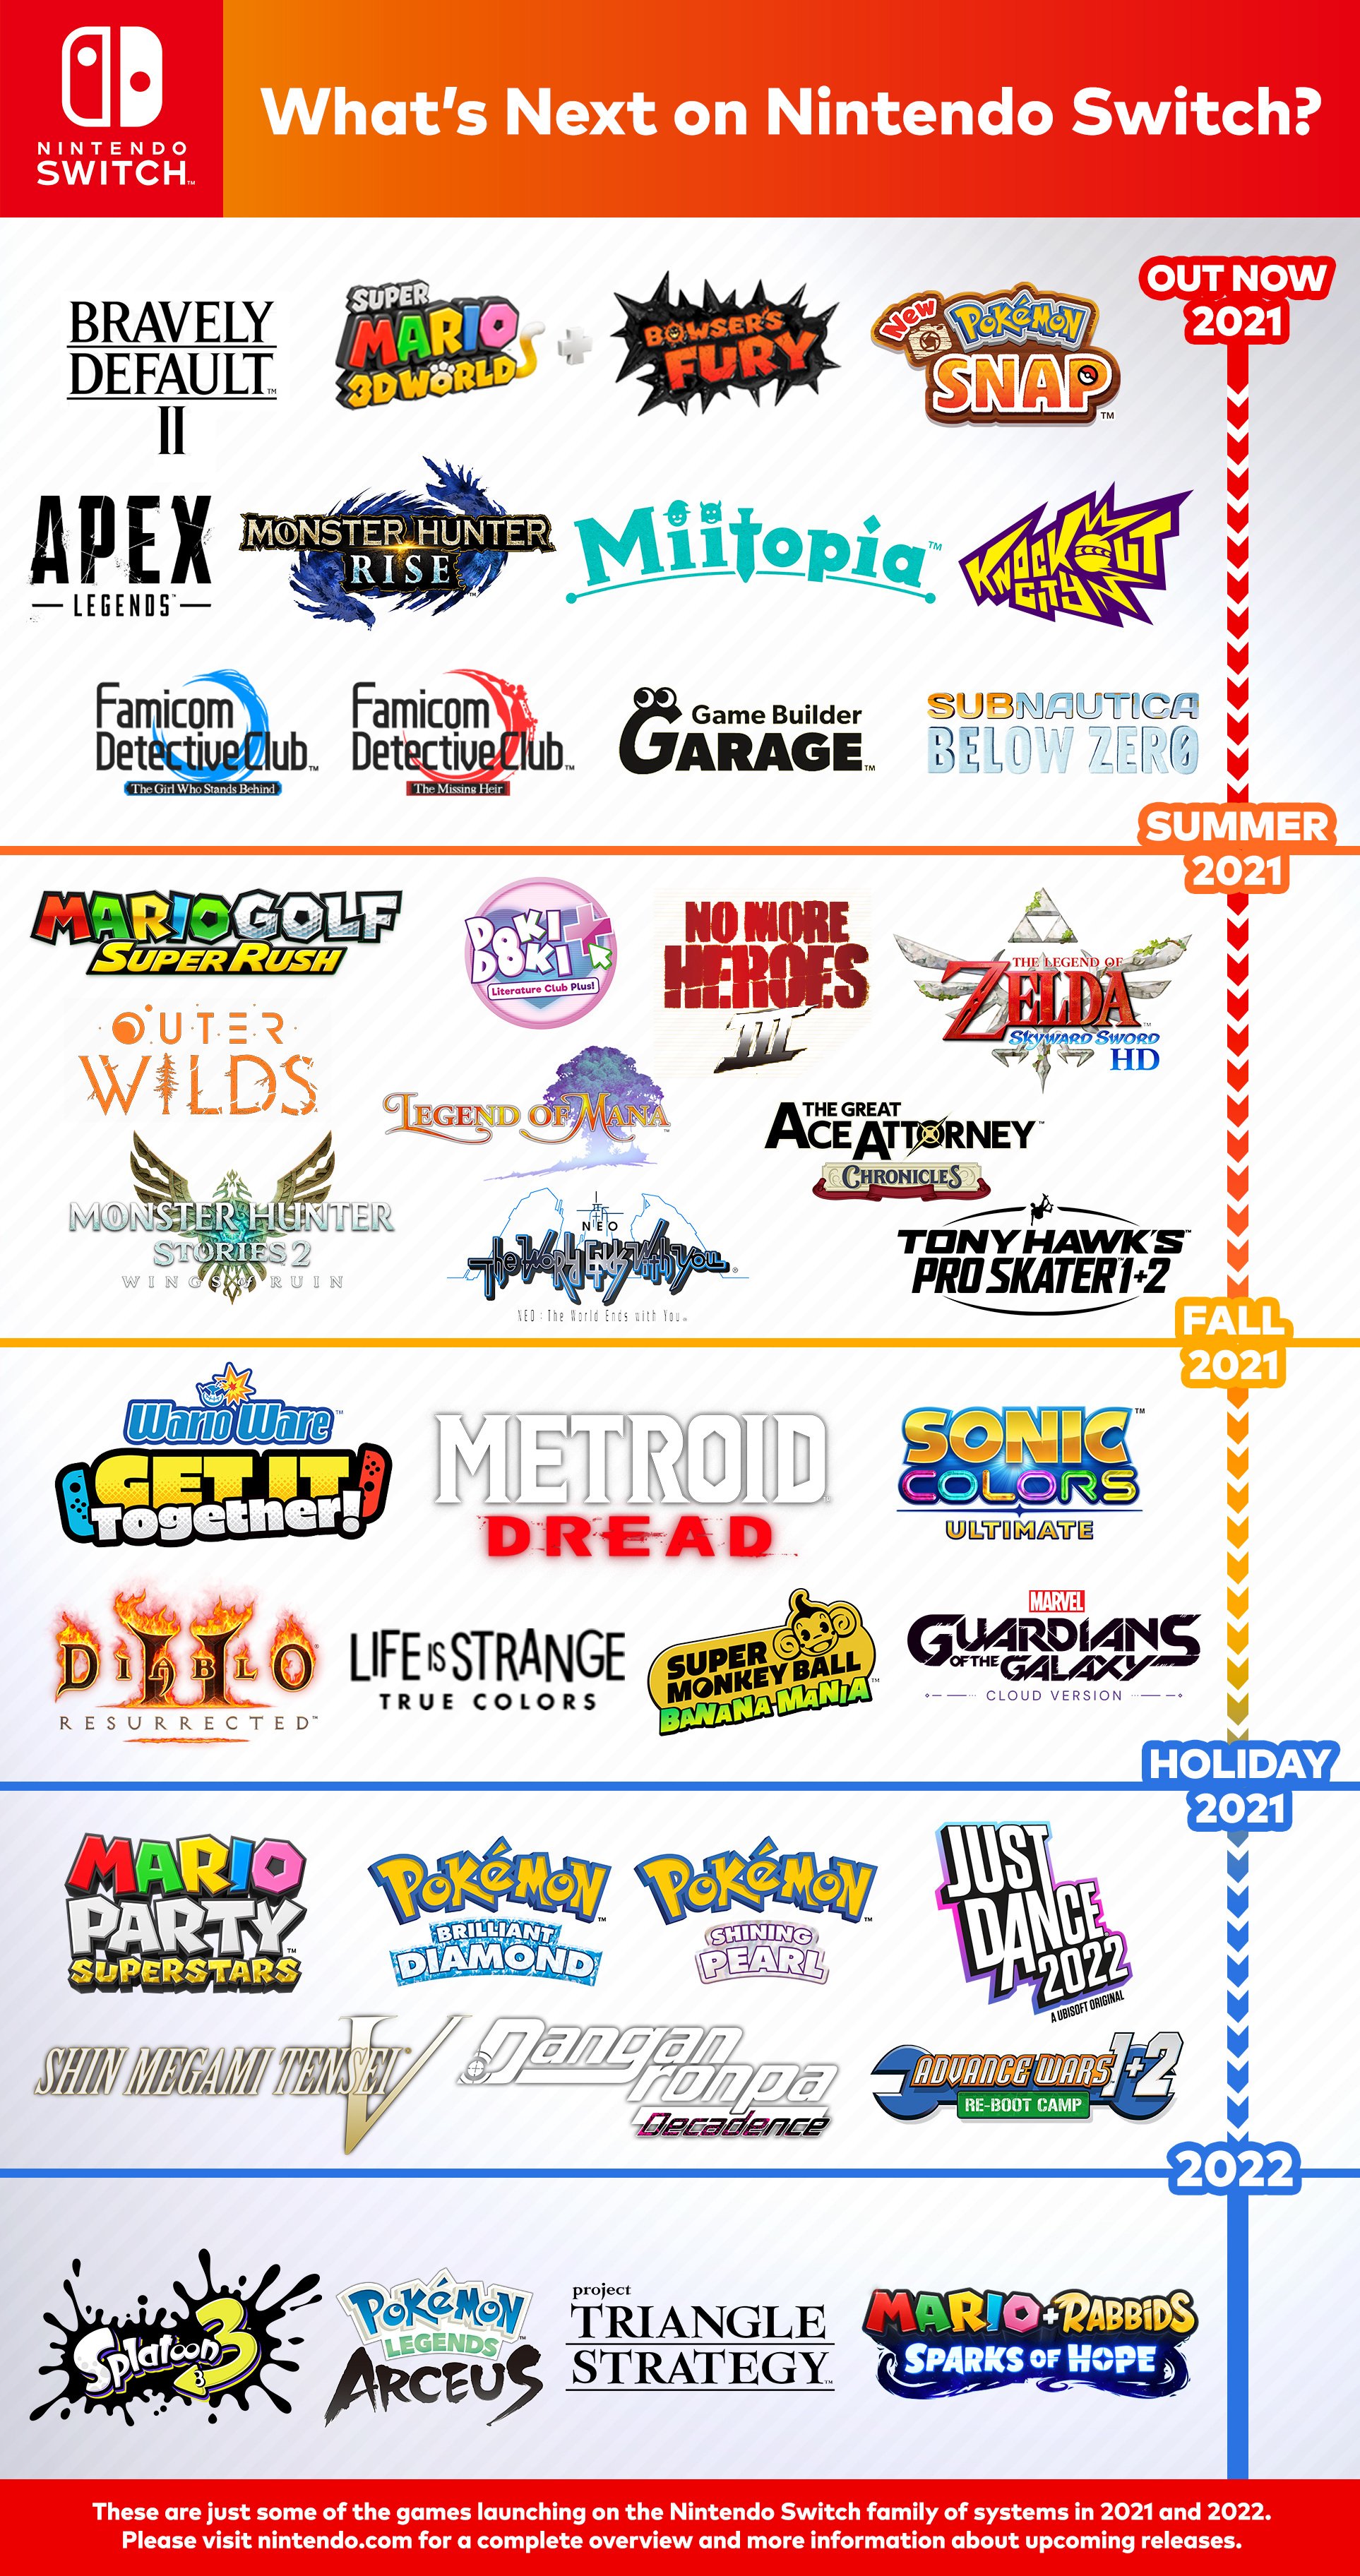 What's Next On Switch? Here's An Infographic Of The Games For 2022 And